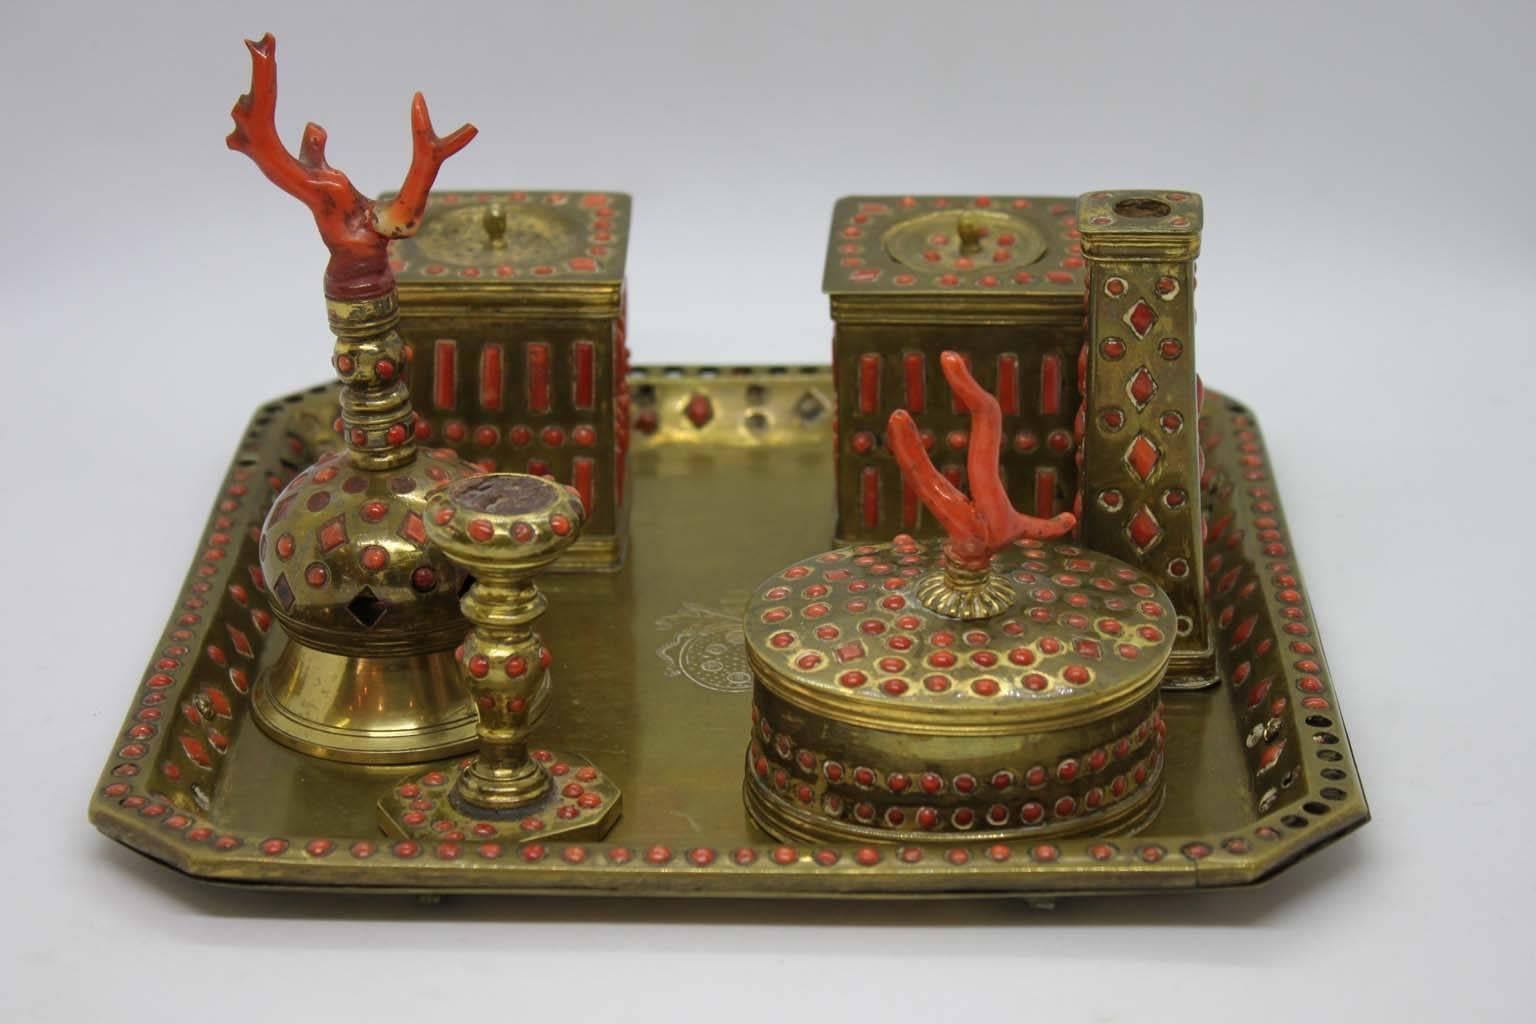 Gilded copper and coral desk set including a tray, two inkwells, a stamp, a circular box, a sprinkler and a candleholder.
Southern Italy, Trapani, 17th century
Width and length of the plate: W 22.5cm, D 22.5cm
(wear to the gilding, minor losses